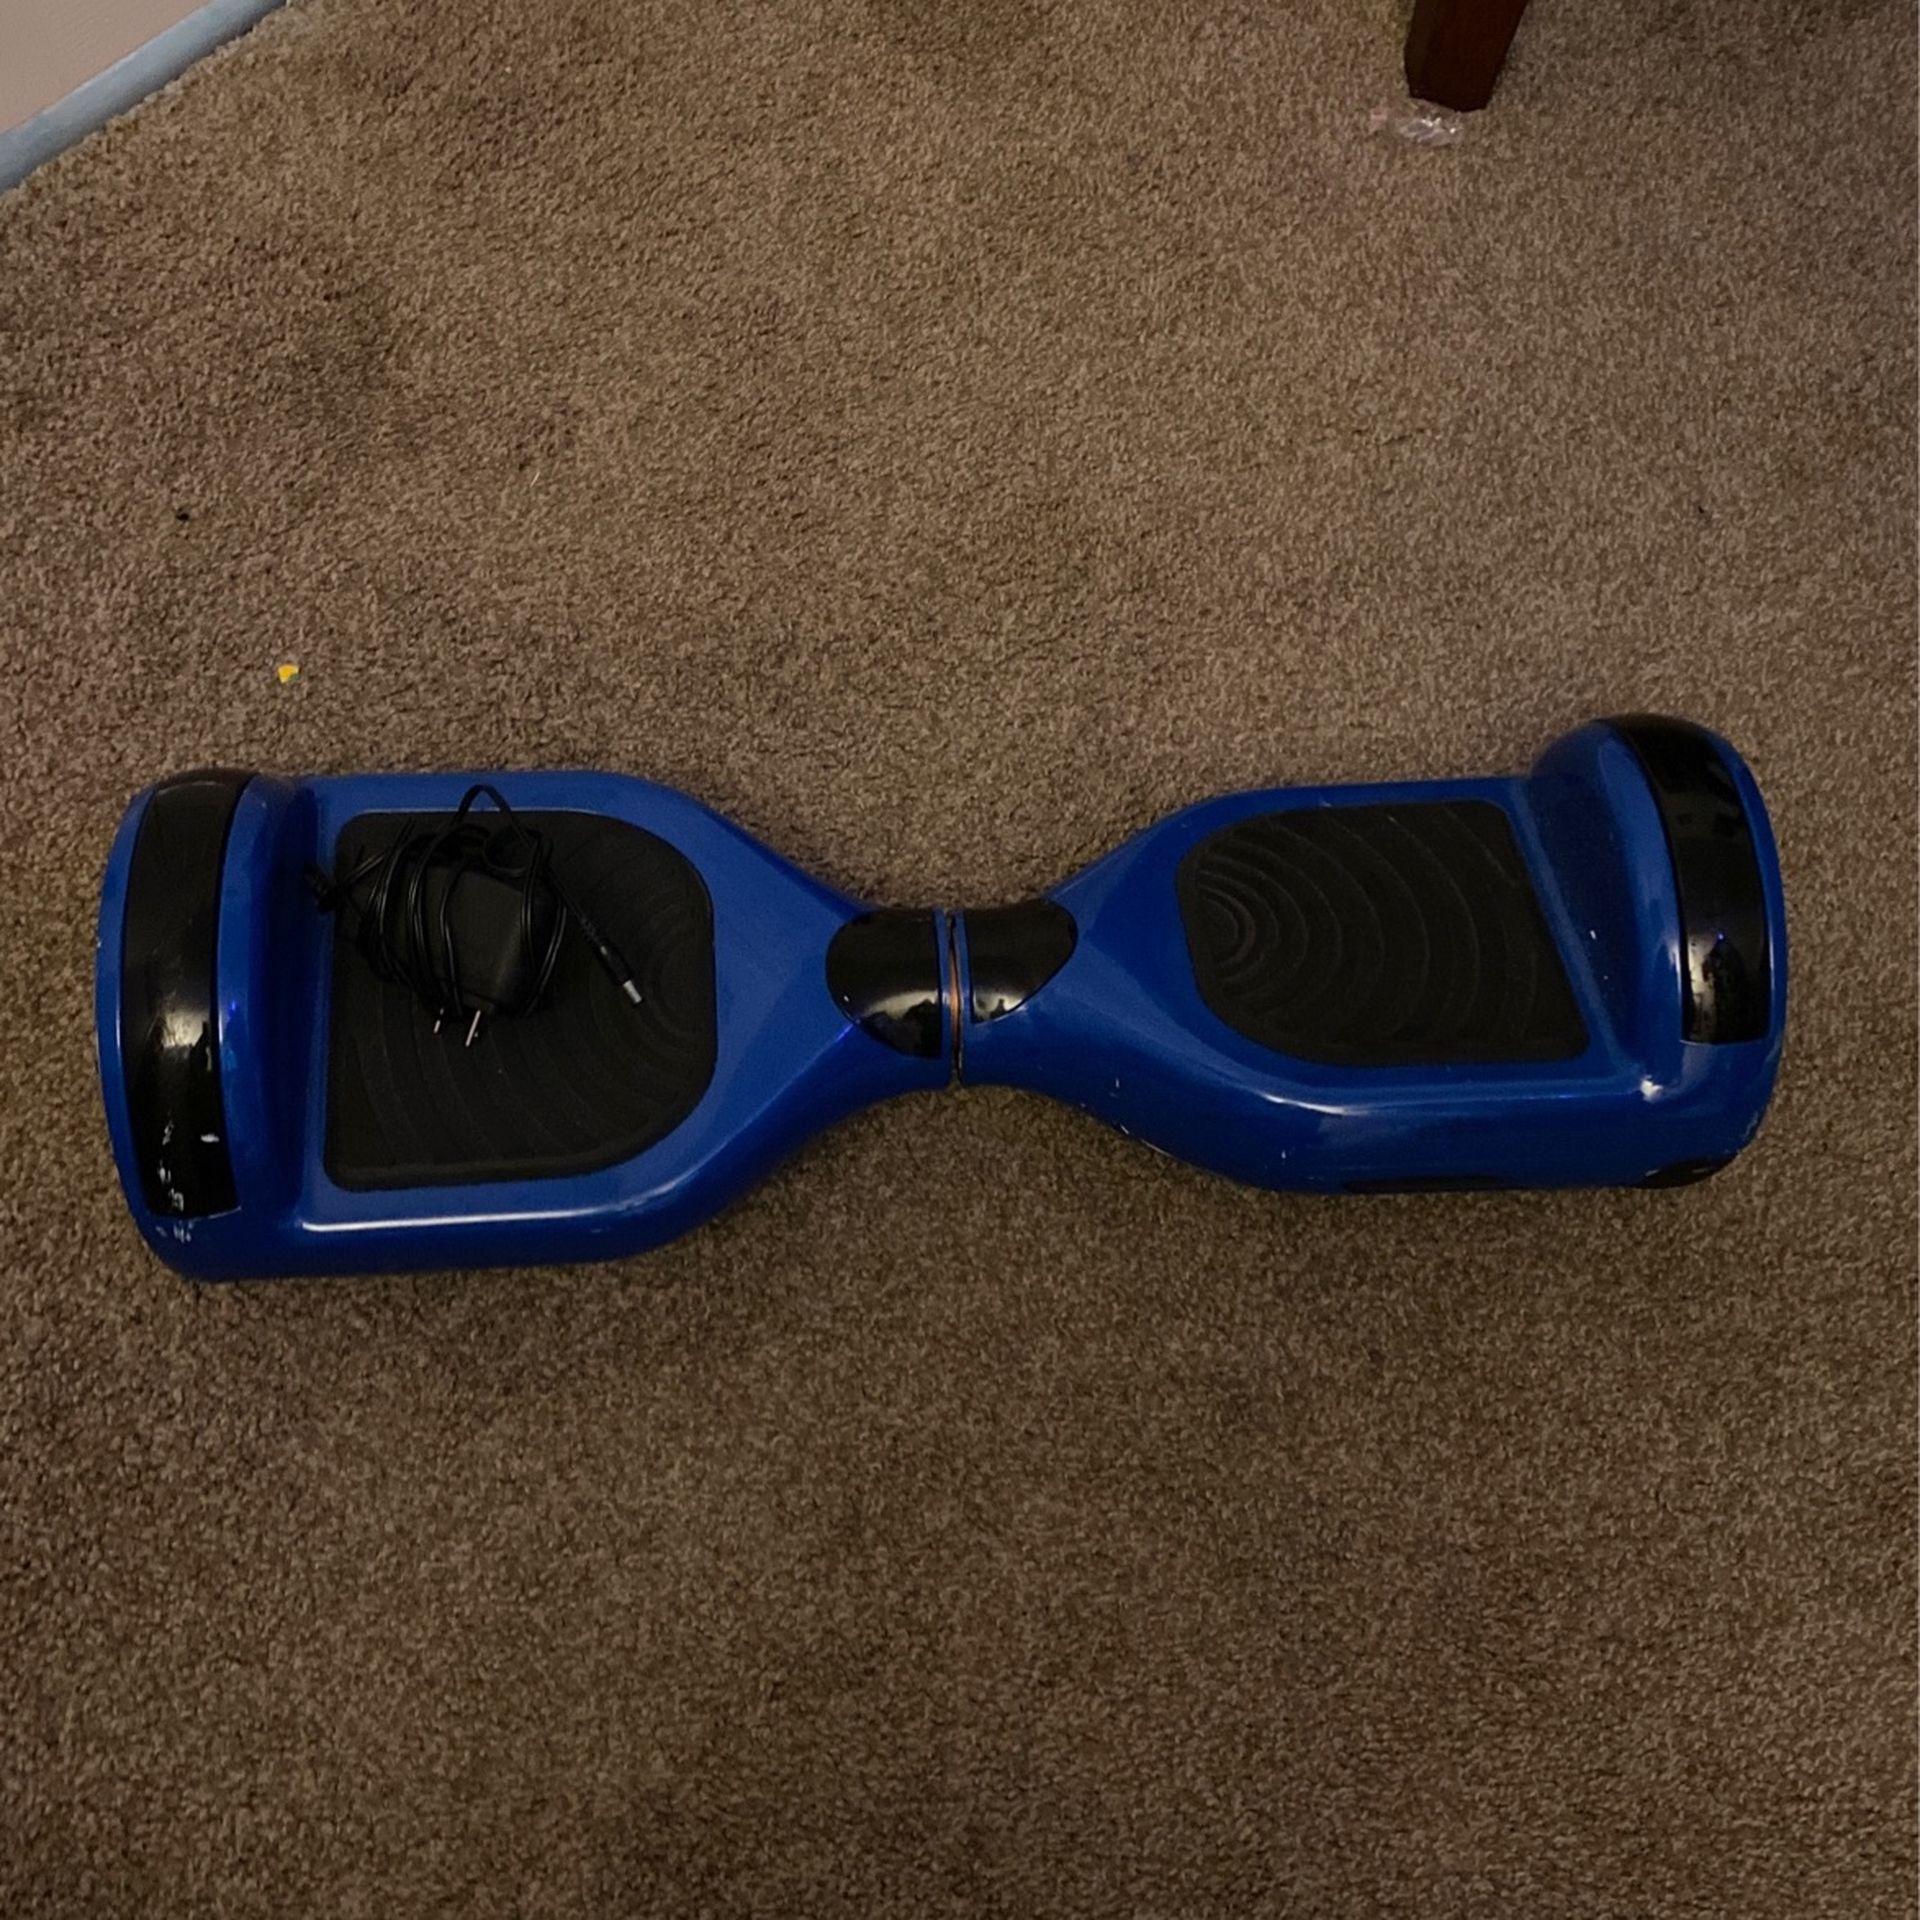 Bluetooth hoverboard $90